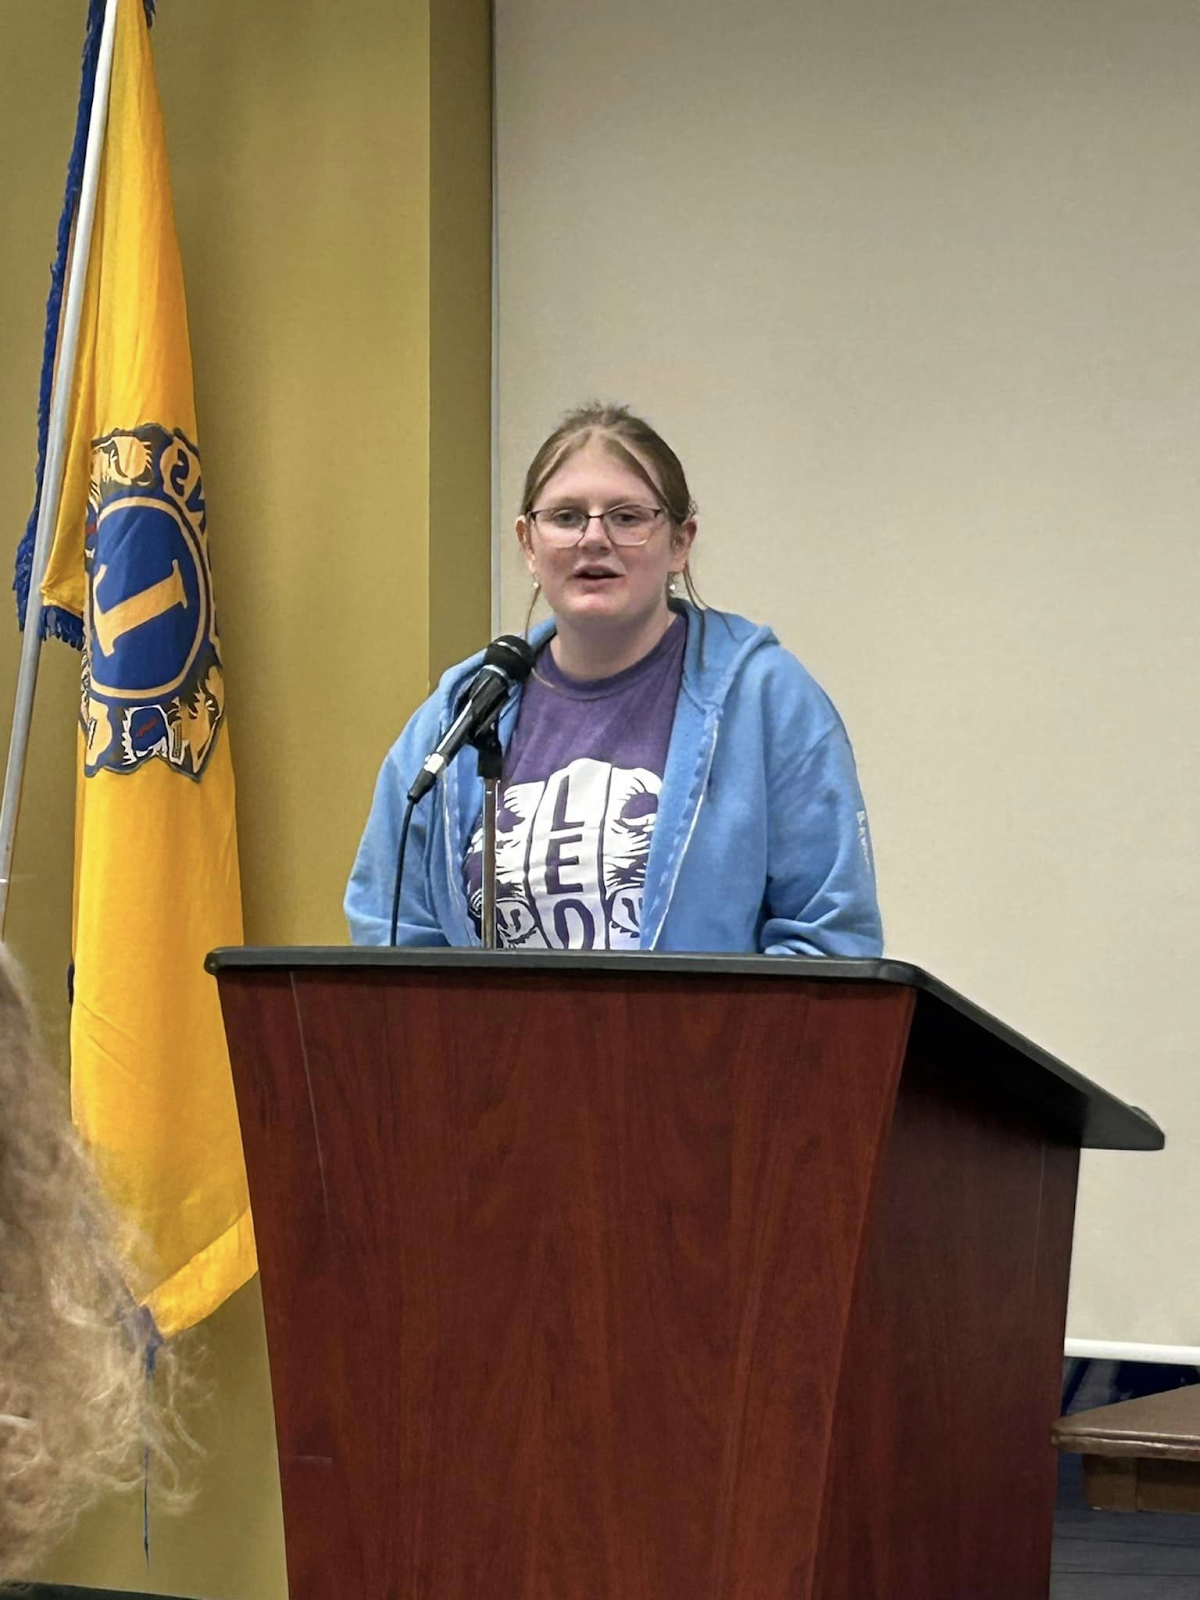 This photo features Abigail G. speaking behind a podium. 